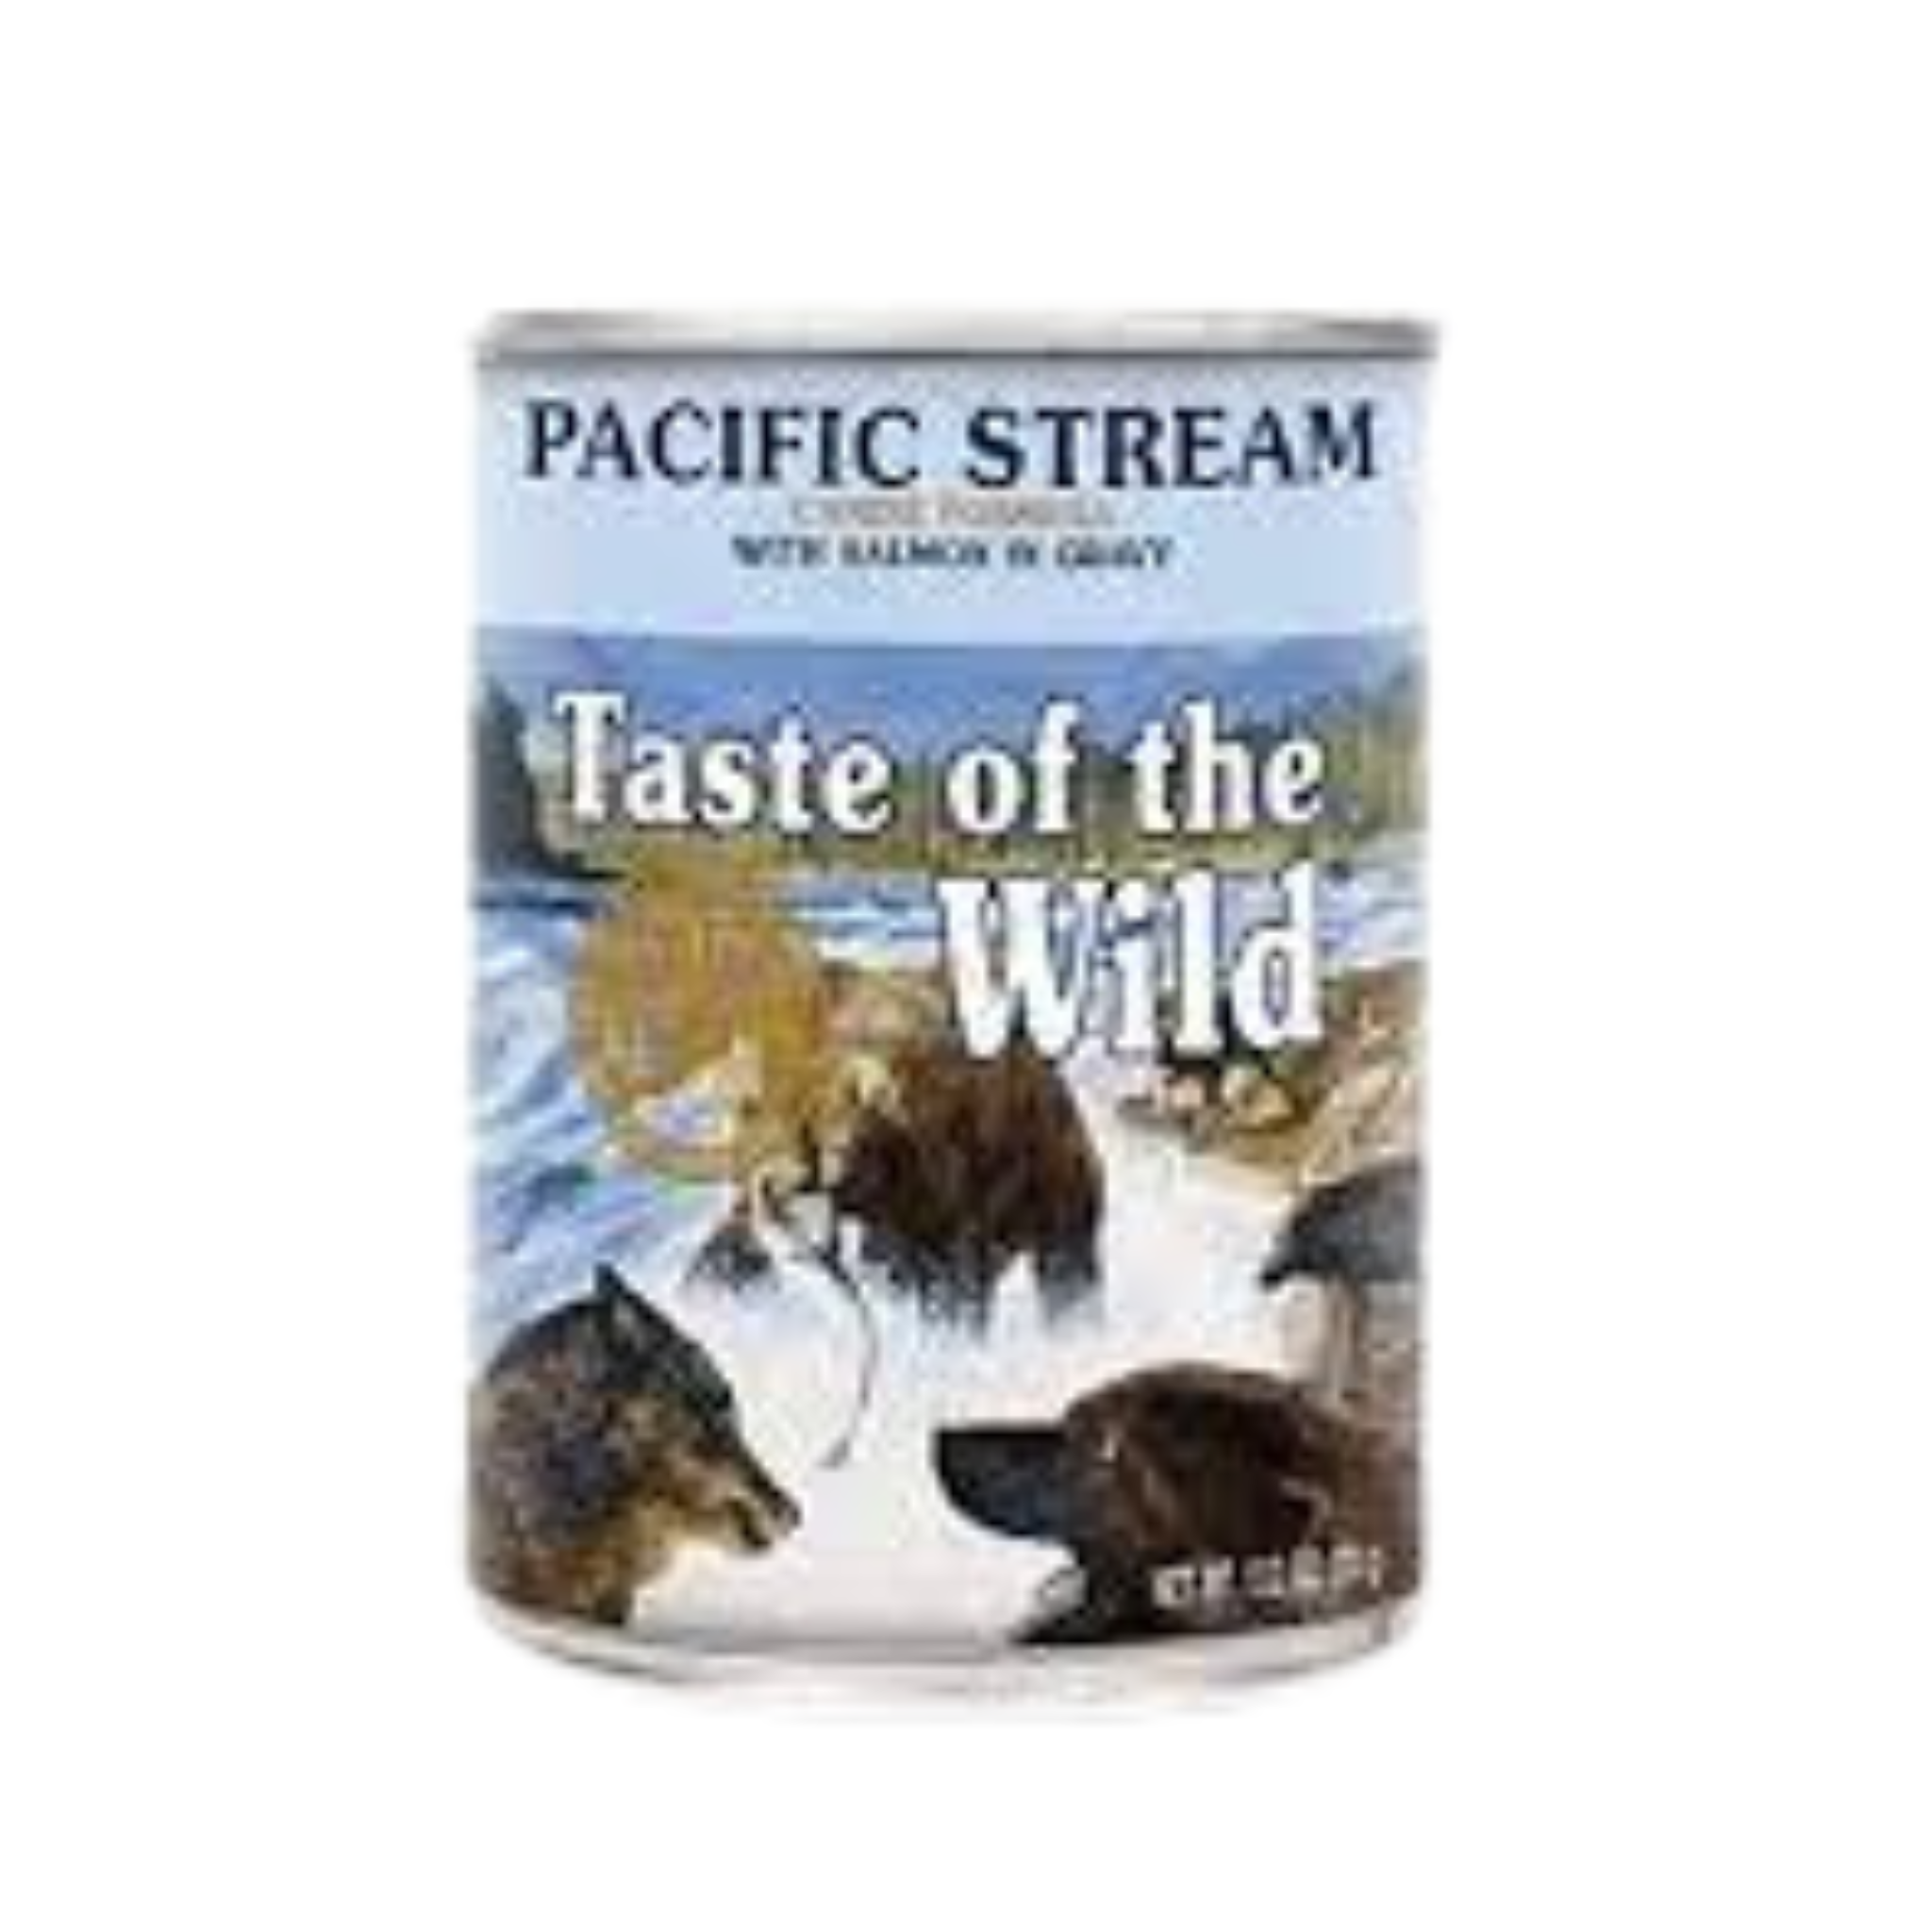 Taste of the Wild Pacific Stream Dog Canned